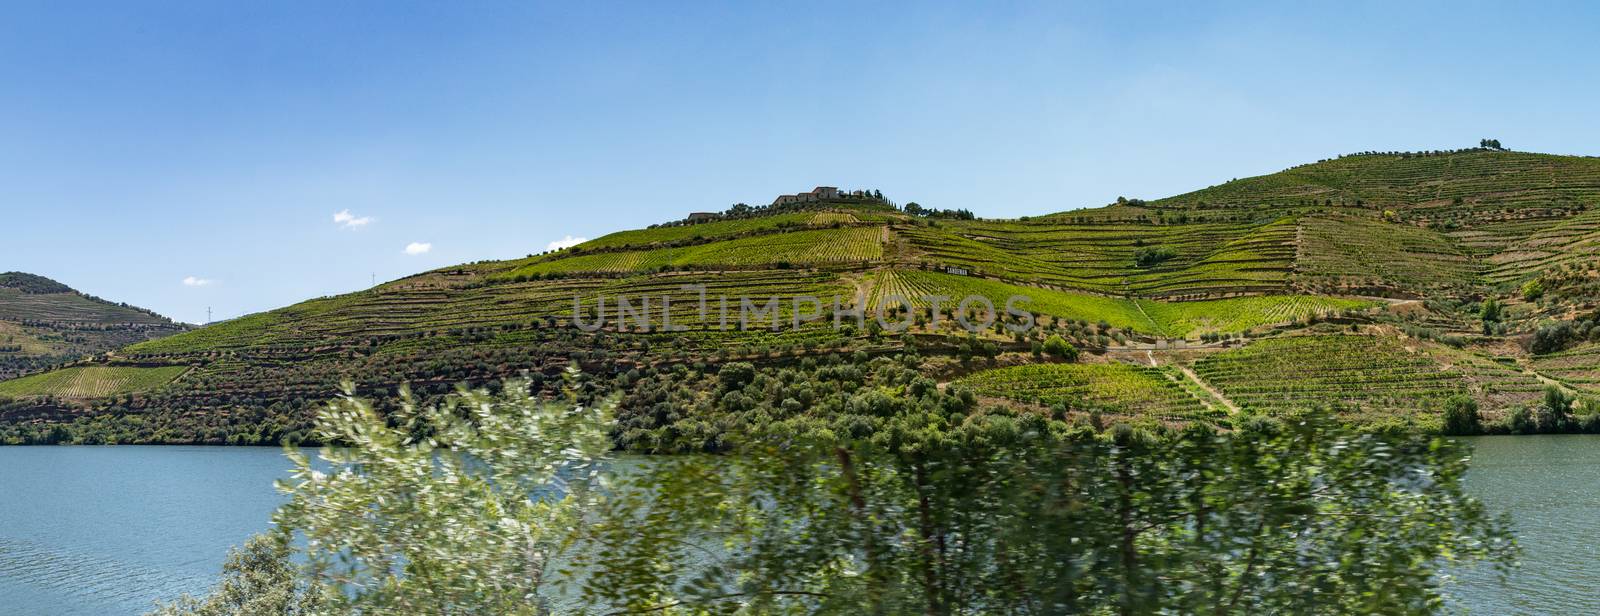 Point of view shot of terraced vineyards in Douro Valley by homydesign